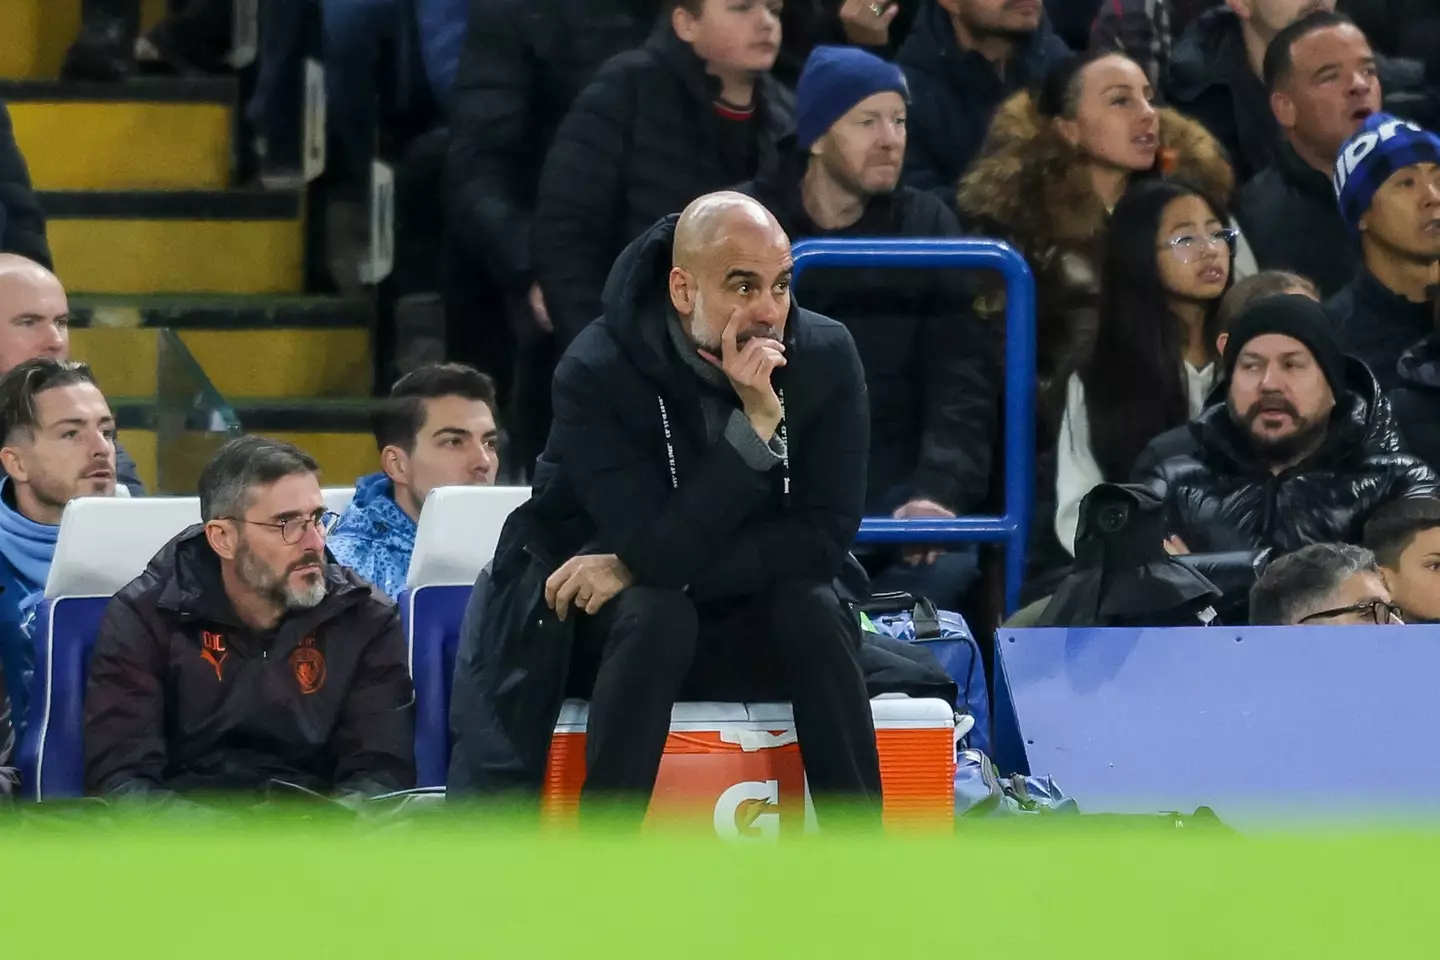 Pep Guardiola on the touchline at Stamford Bridge. Image: Getty 